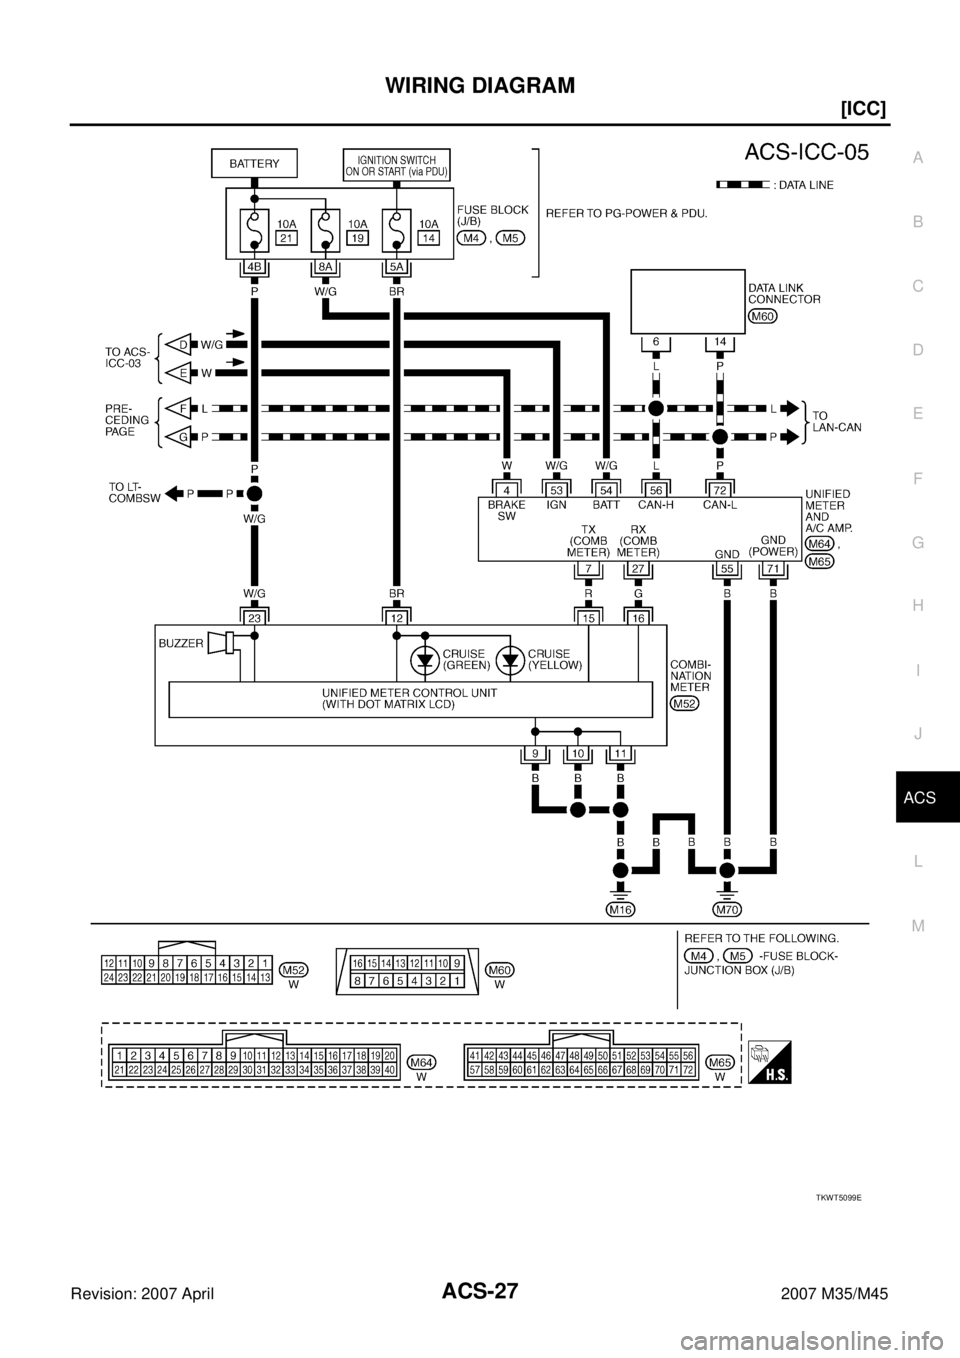 INFINITI M35 2007  Factory Owners Guide WIRING DIAGRAM
ACS-27
[ICC]
C
D
E
F
G
H
I
J
L
MA
B
ACS
Revision: 2007 April2007 M35/M45
TKWT5099E 